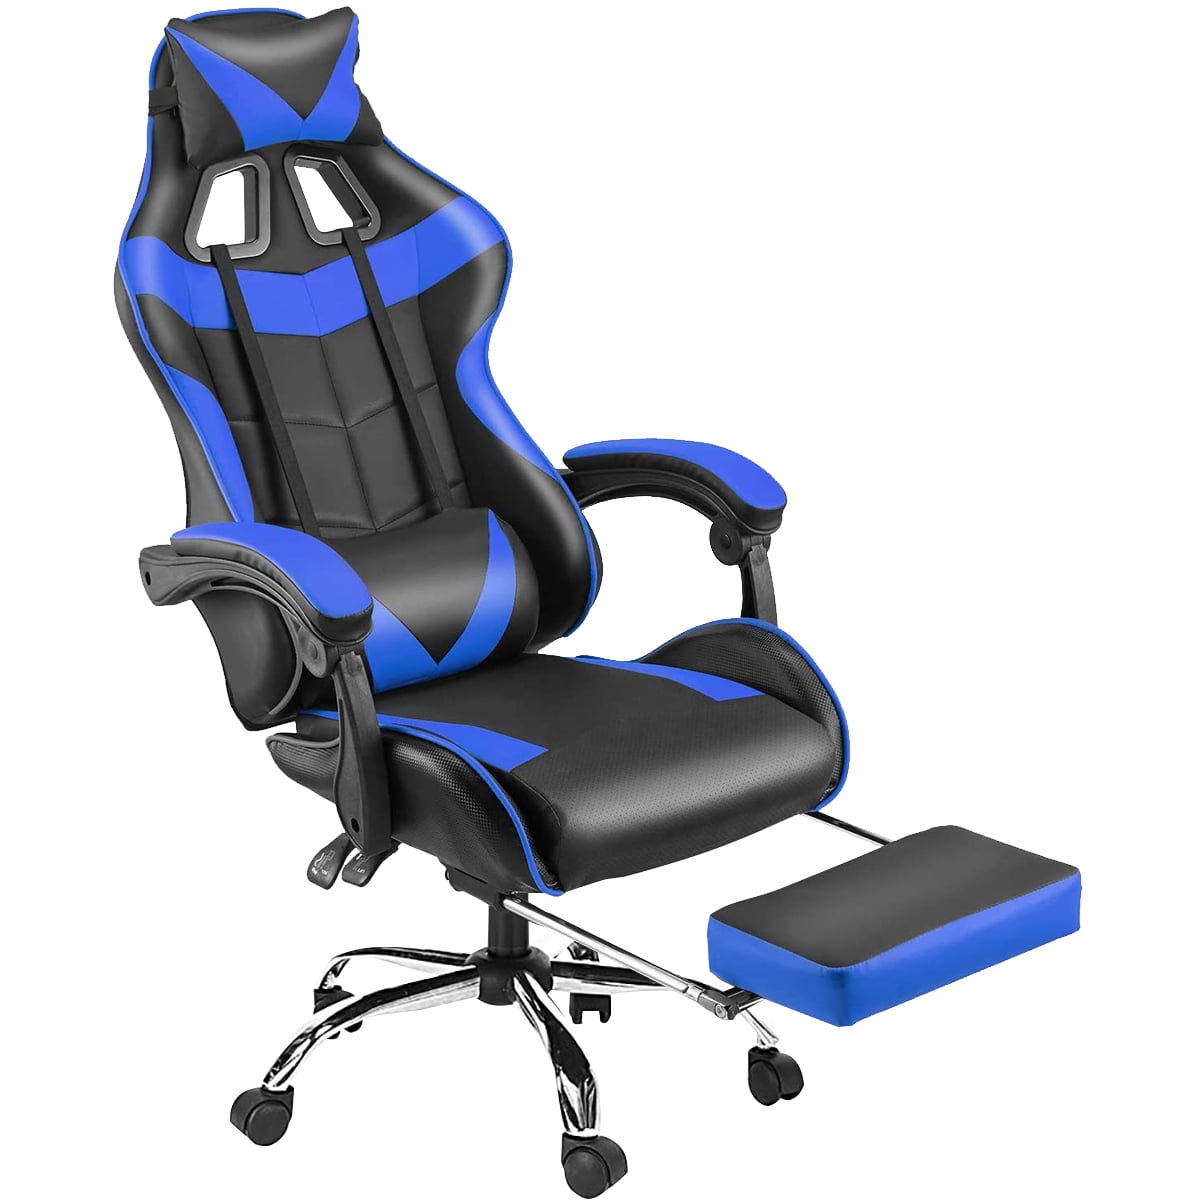 Ergonomic Computer Gaming Chairs High Back Office Chair PU Leather Footrest Lift 